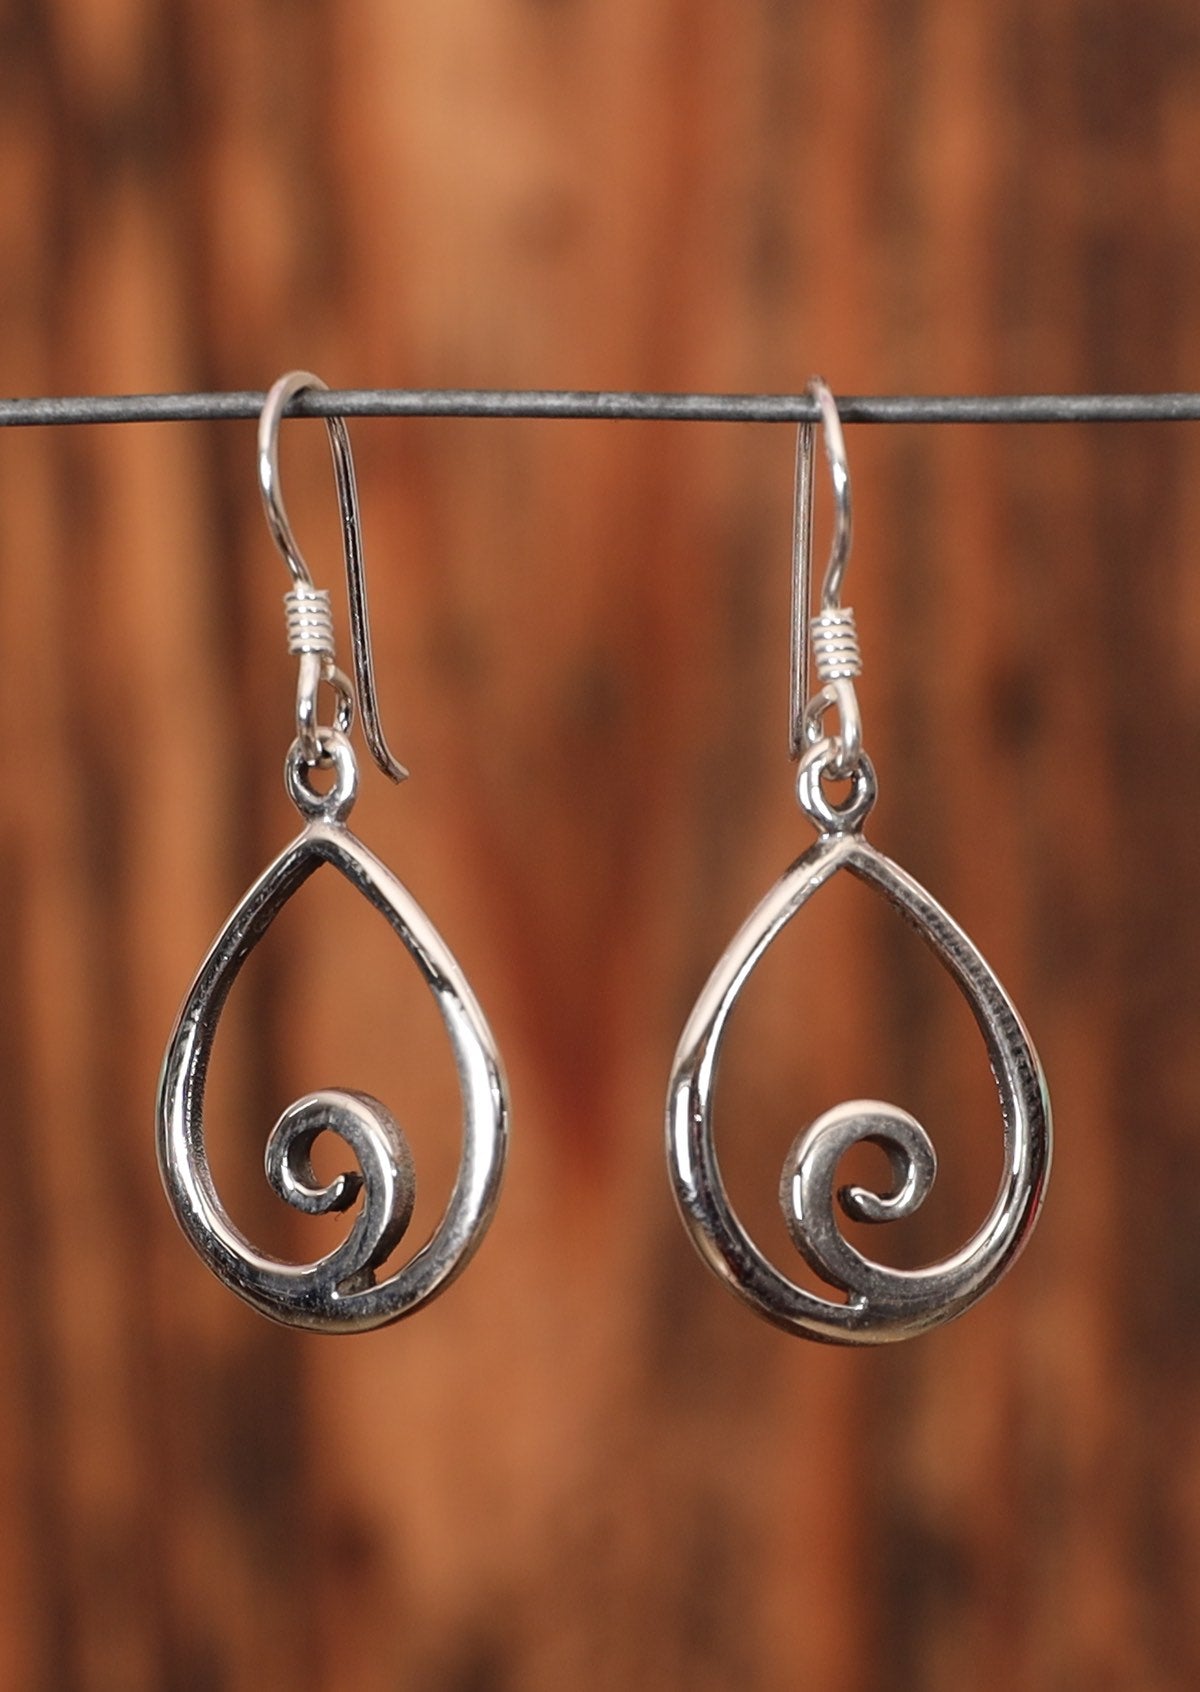 92.5% silver teardrop earrings with a swirl at the bottom sit on wire for display.